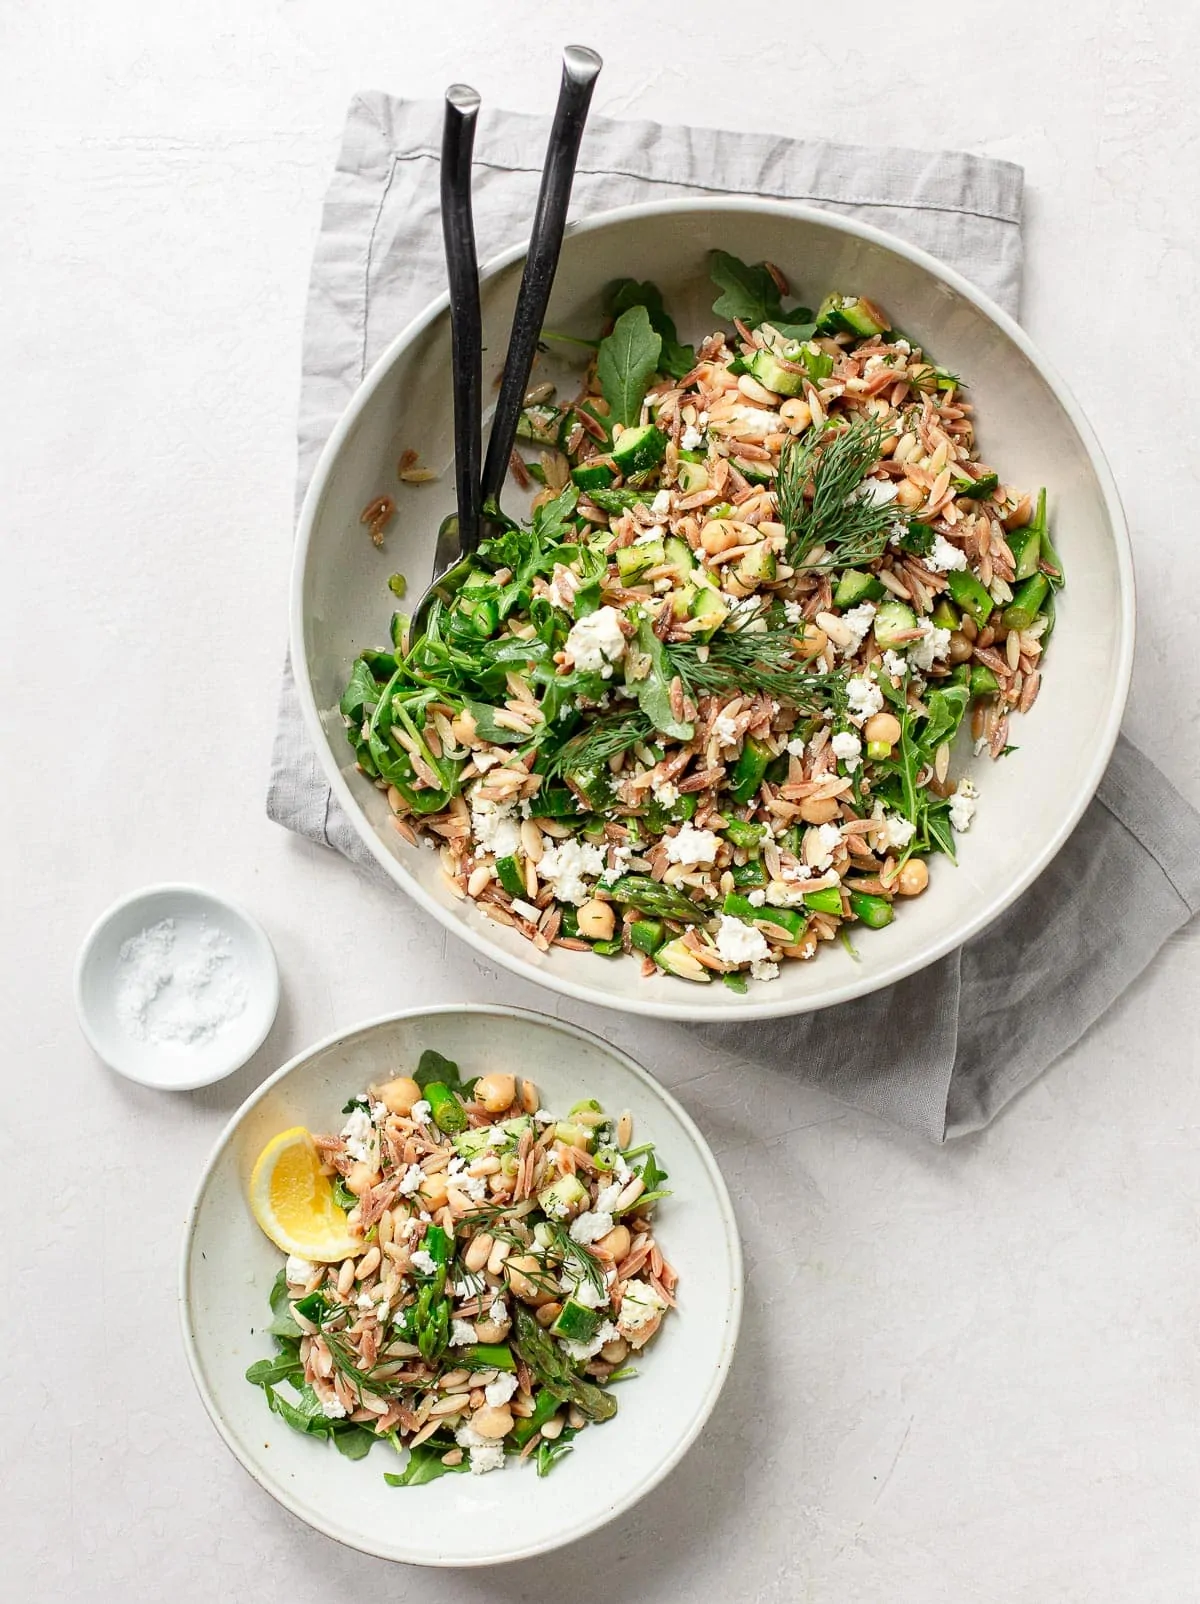 Orzo Pasta Salad with Asparagus, Lemon and Chickpeas by Familystyle Food // FoodNouveau.com